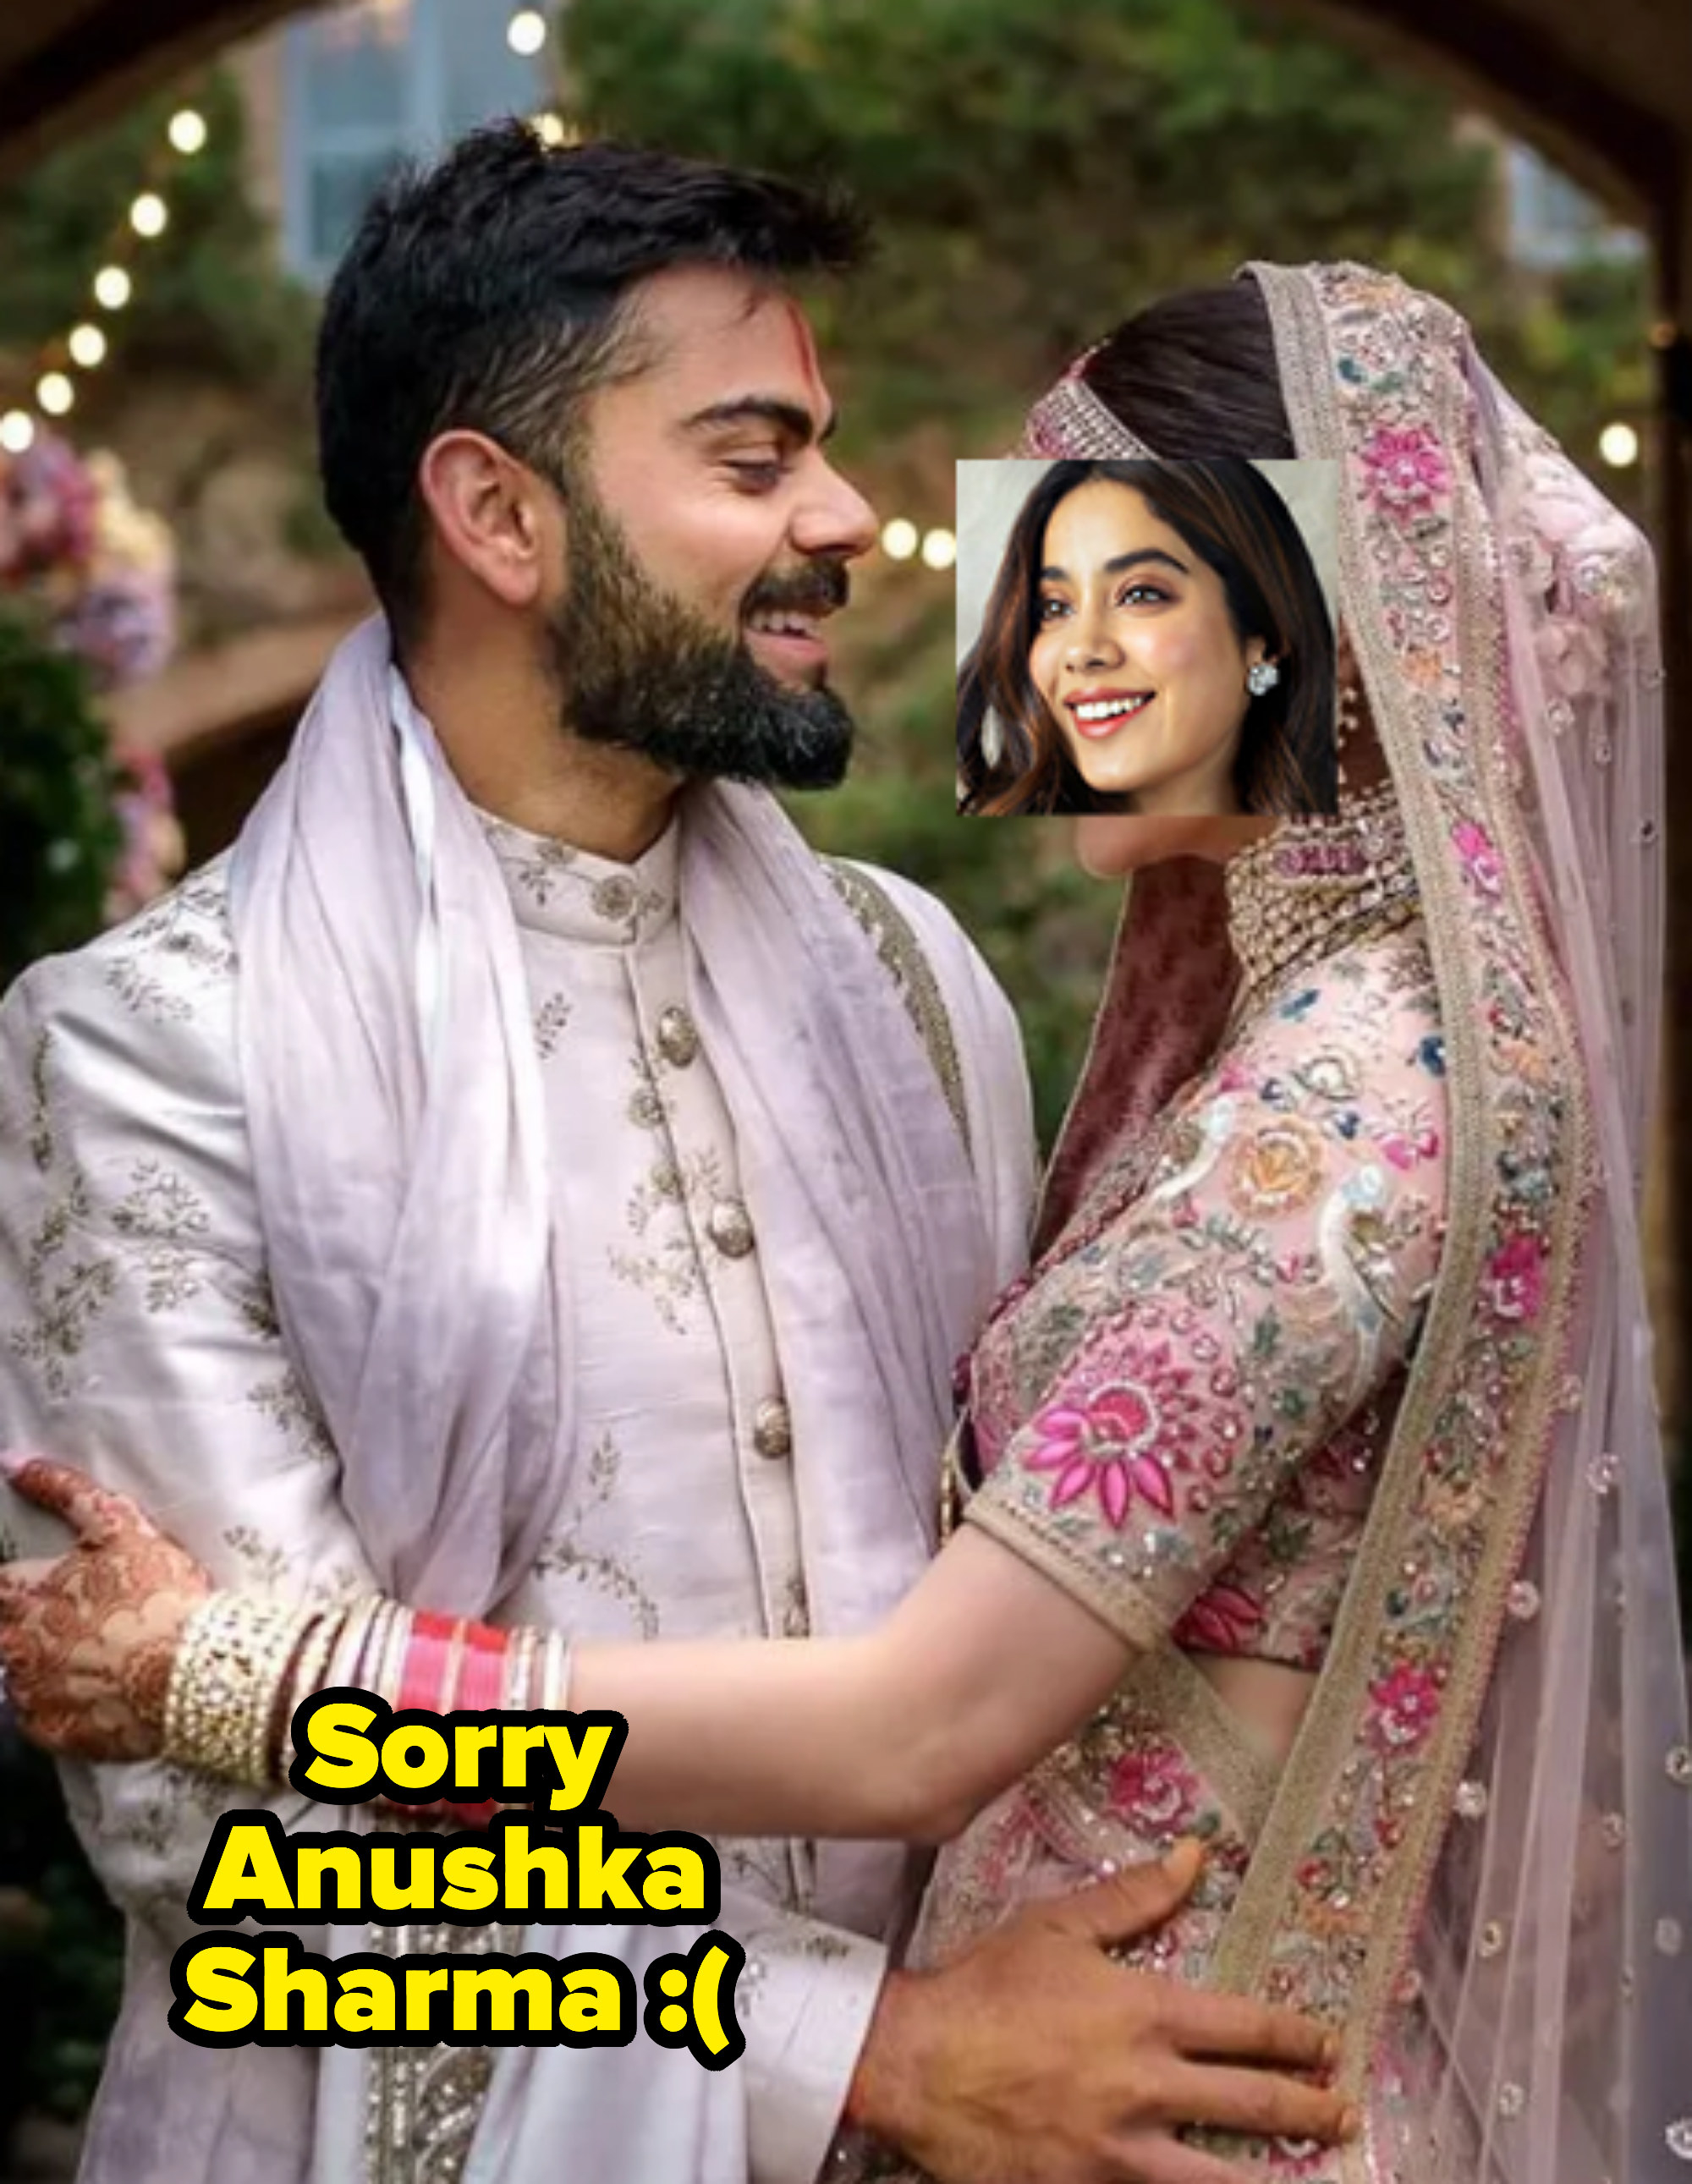 Virat Kohli and Anushka Sharma smile and pose for their wedding picture. A picture of Janhvi Kapoor&#x27;s is superimposed